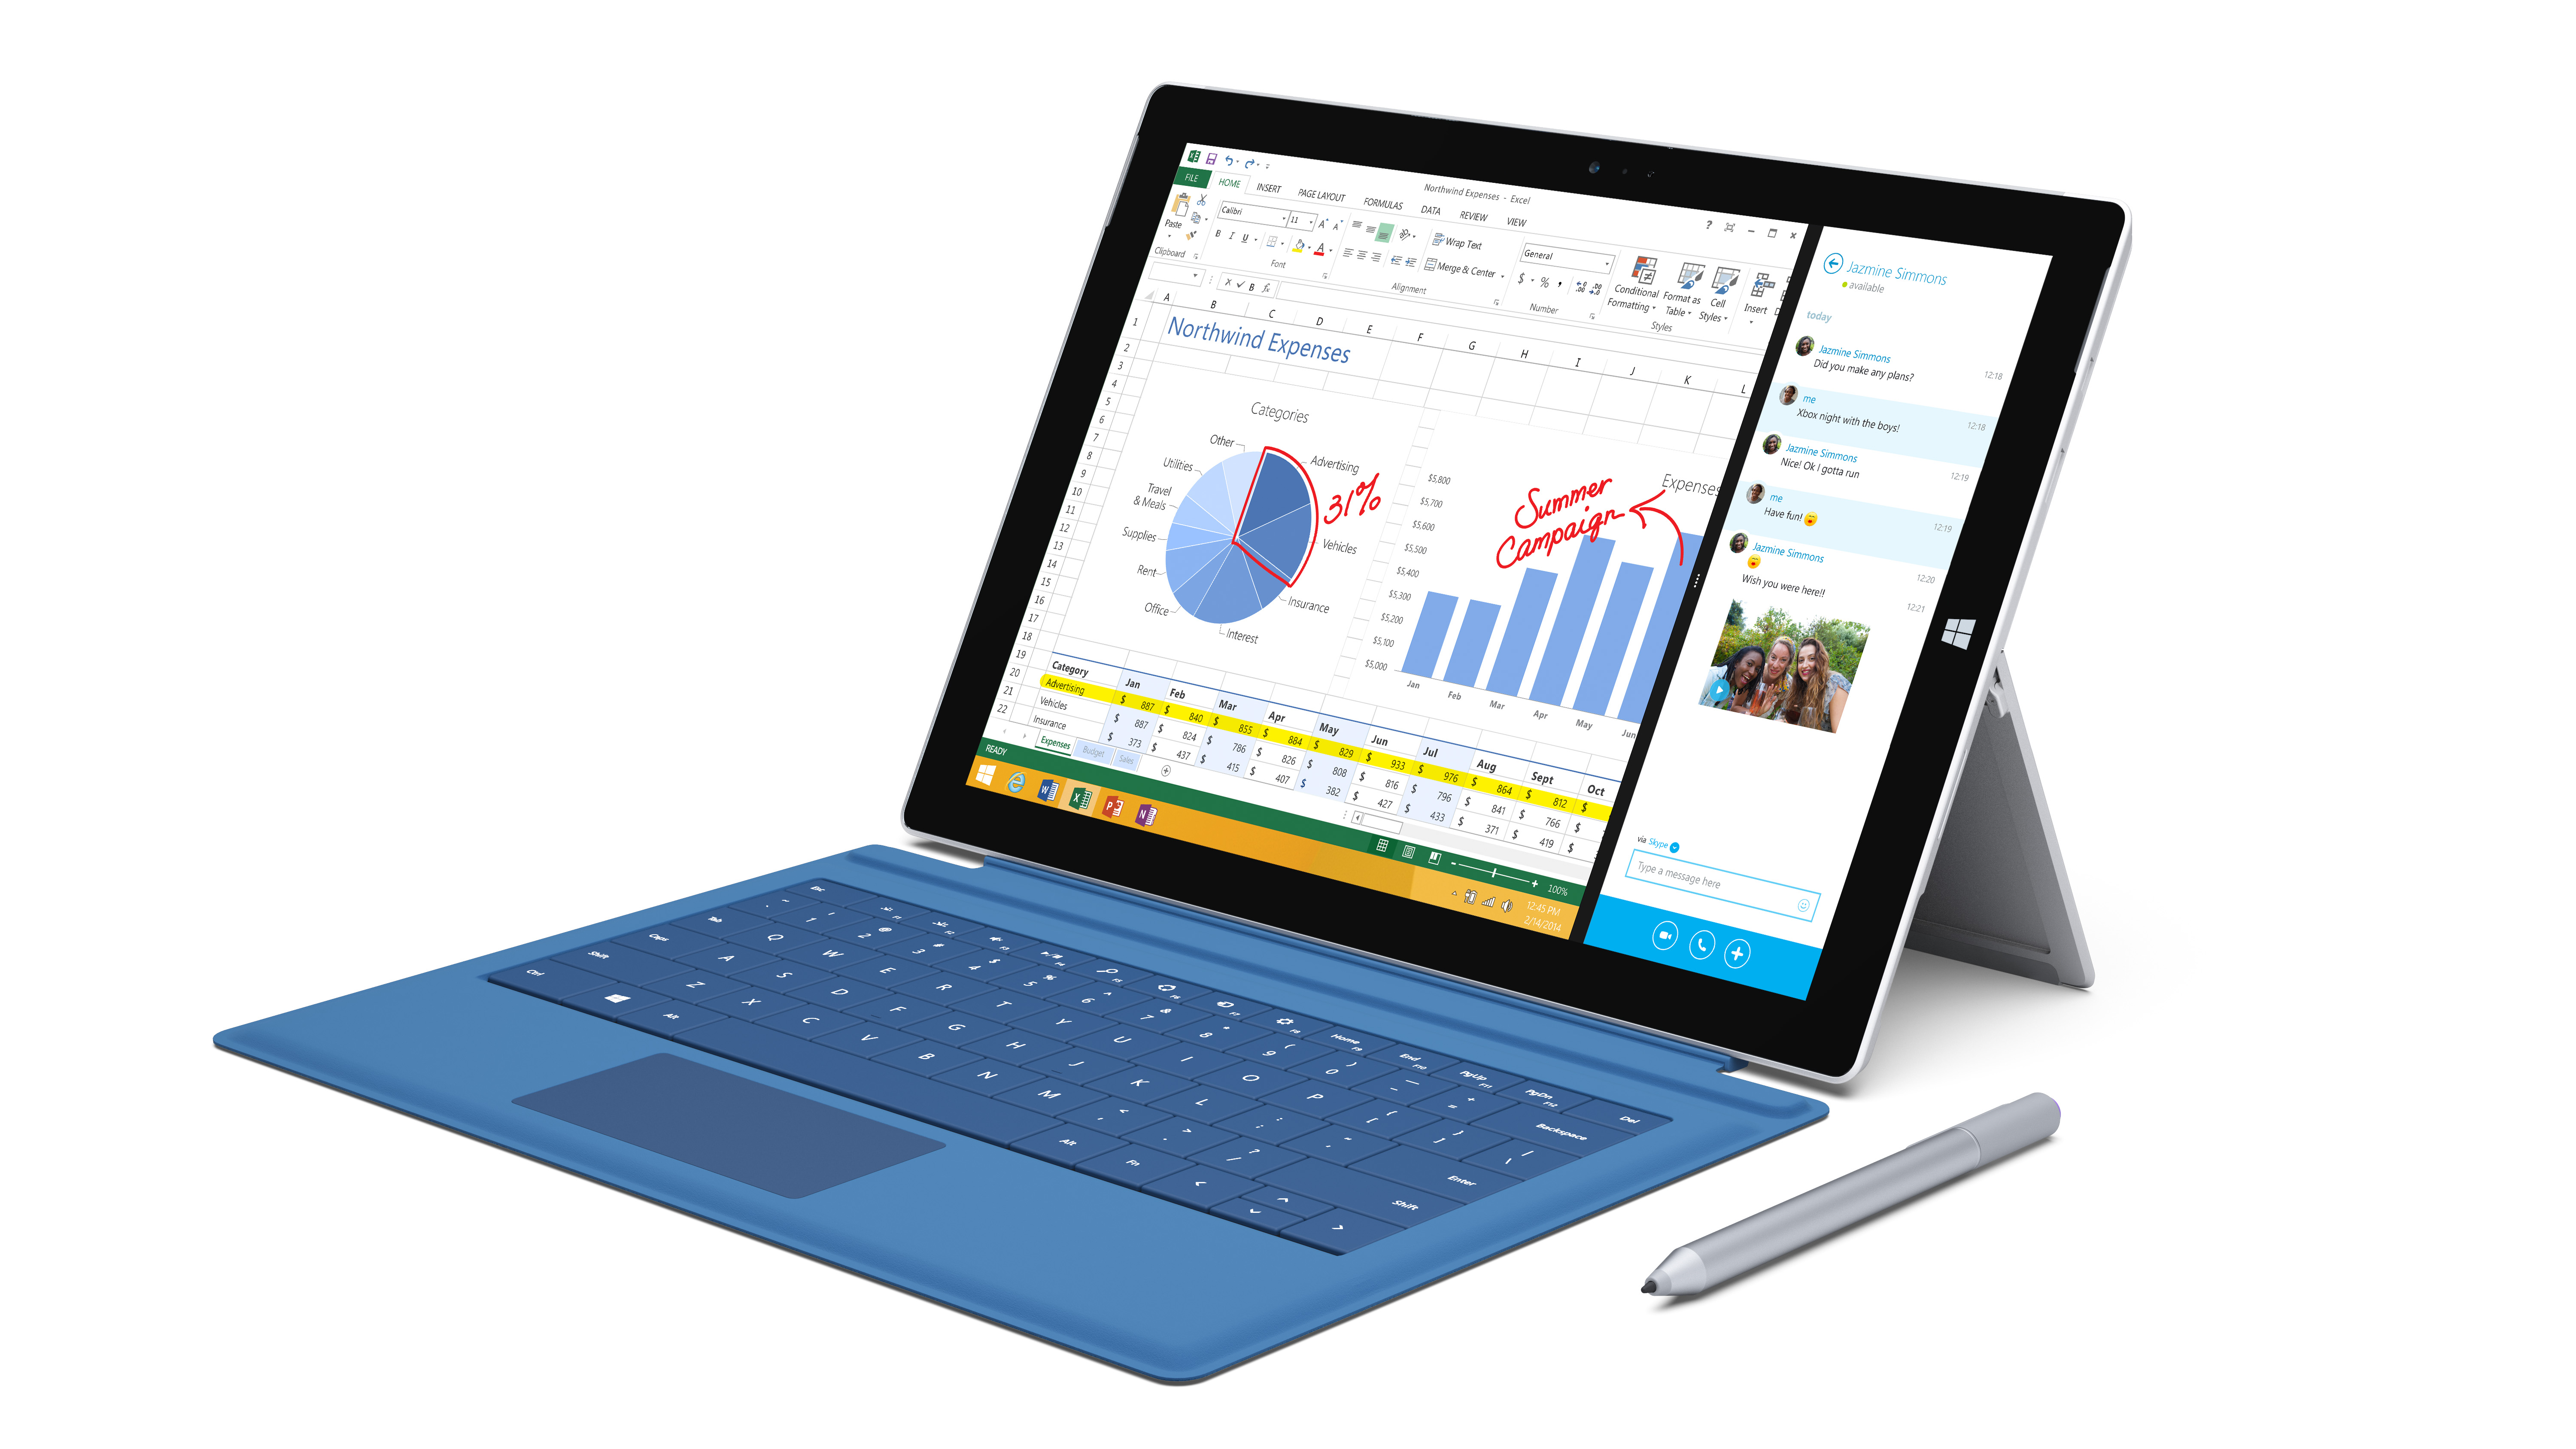 Microsoft Introduces Surface Pro The Tablet That Can Replace Your